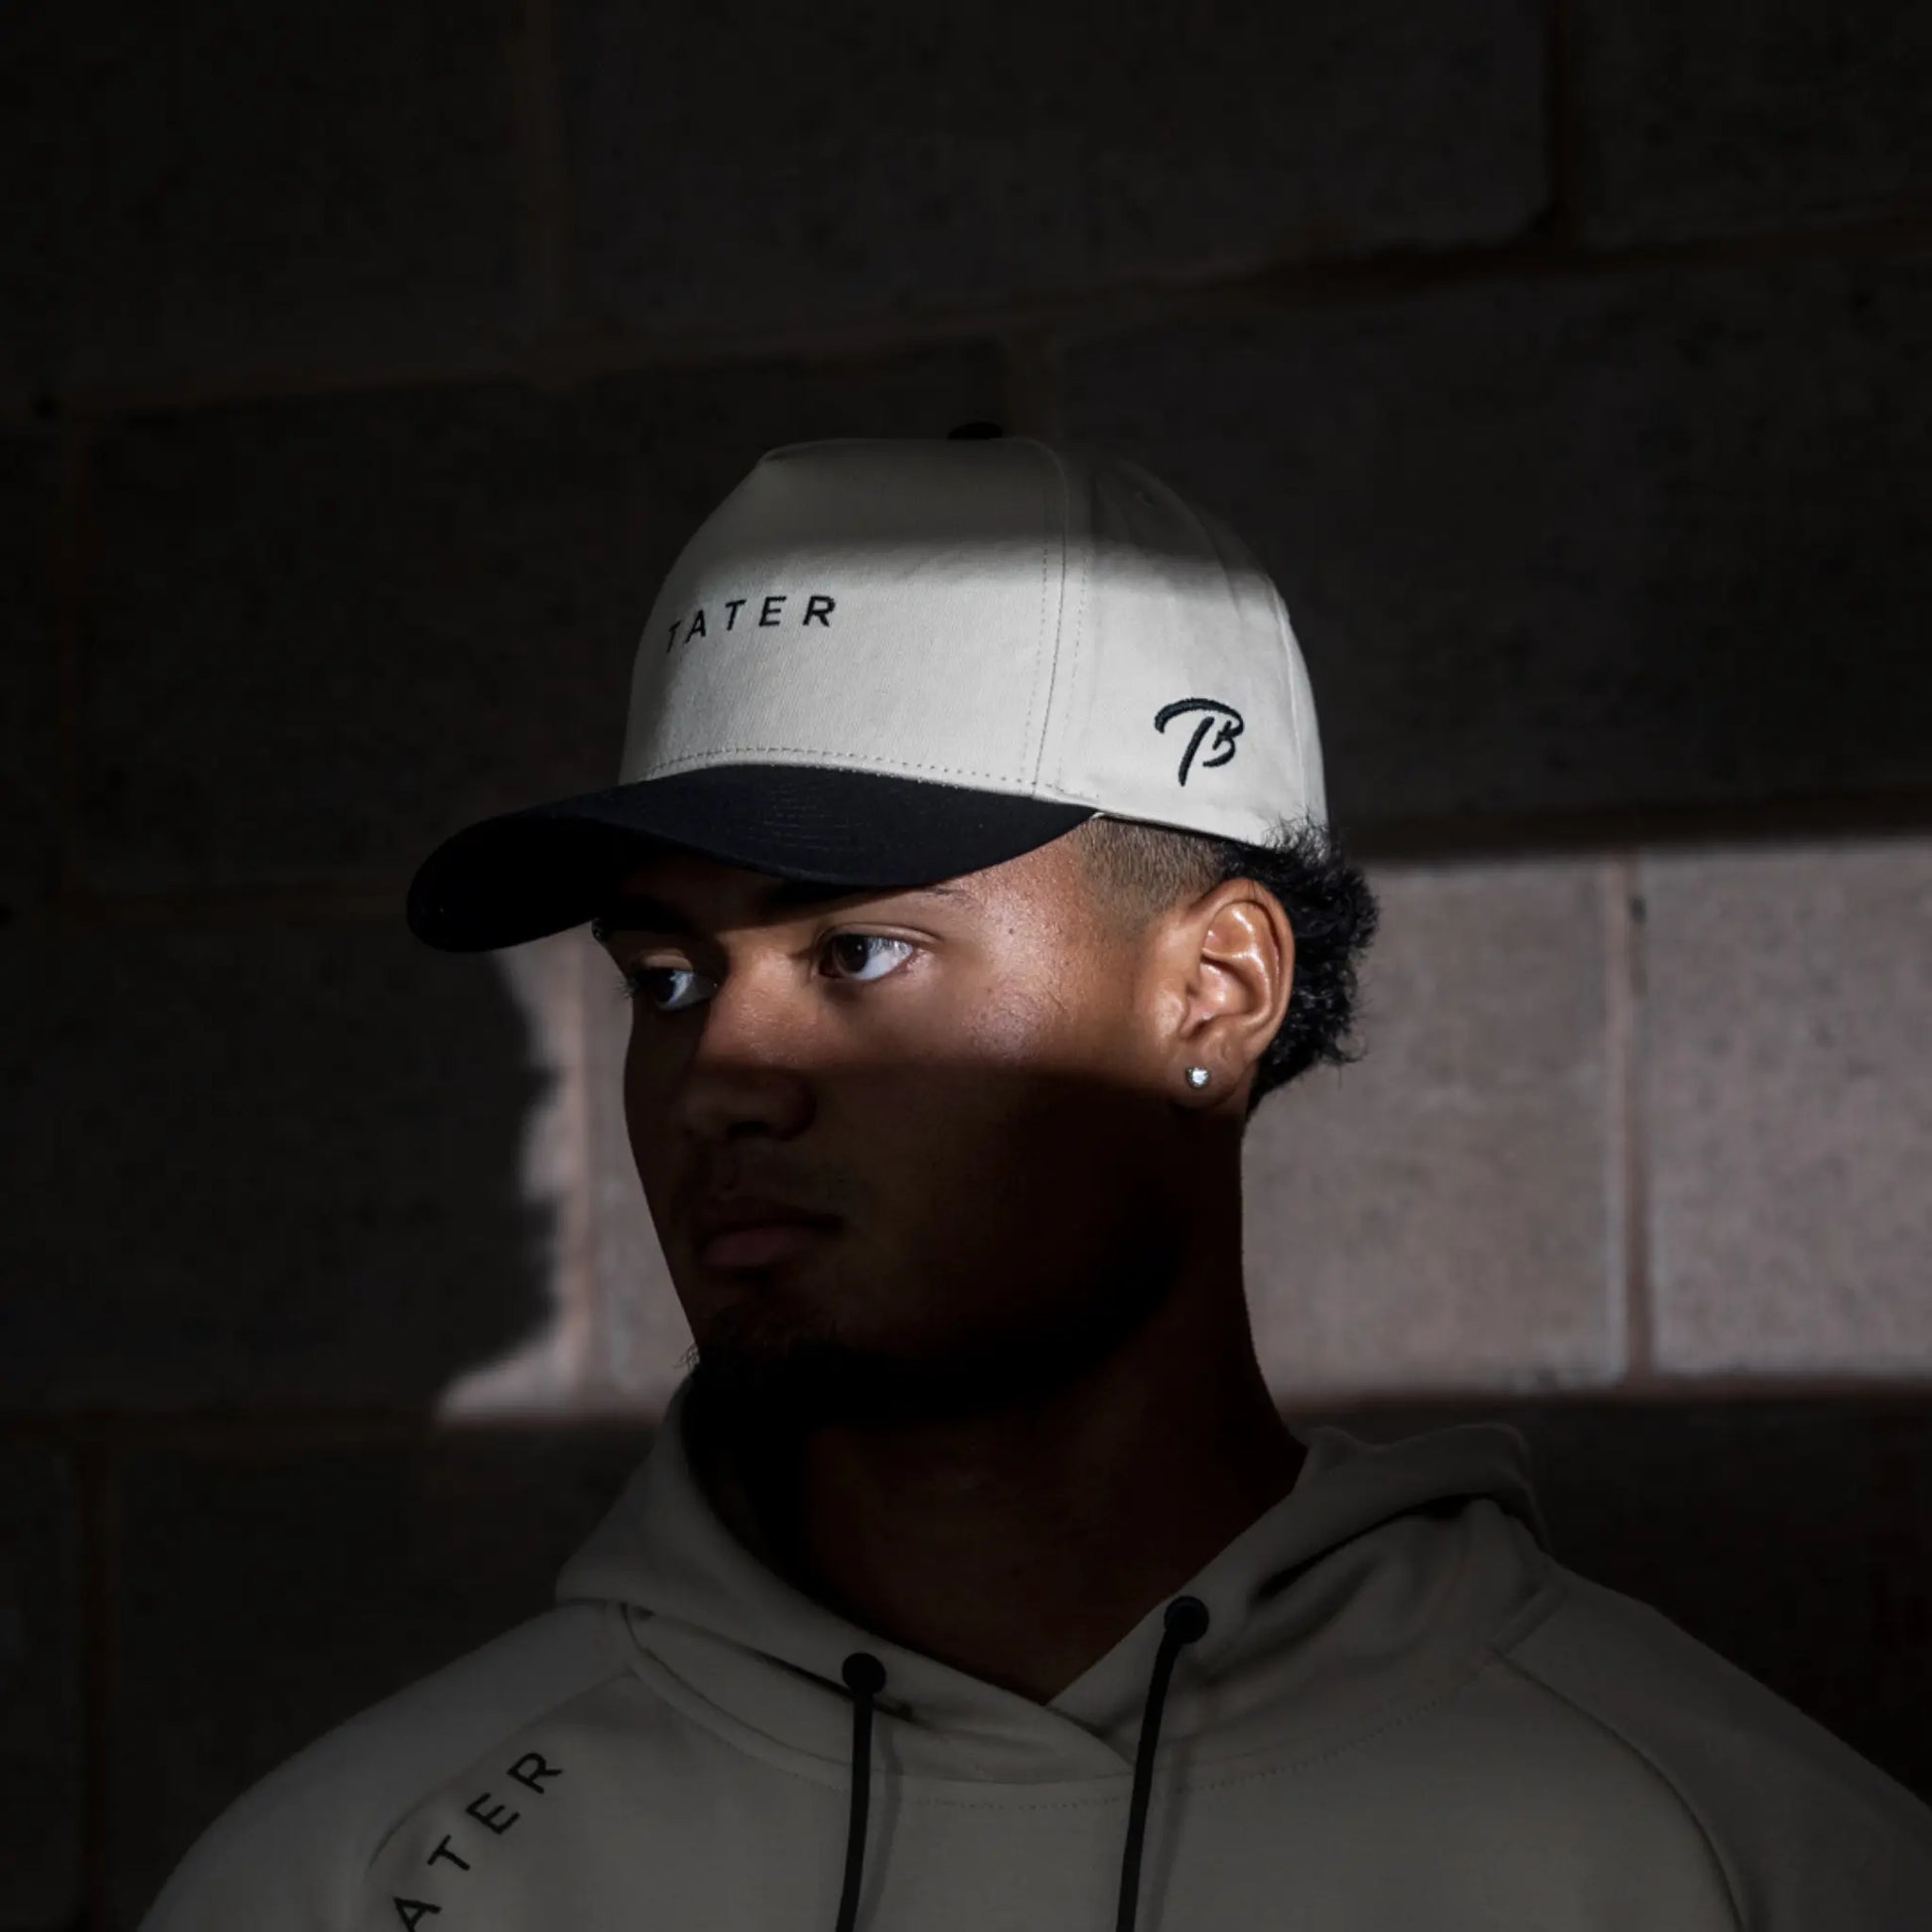 The image features a person wearing a tan snapback hat with the word "TATER" on the front and the Tater Baseball "TB" logo on the side, paired with a hoodie that also carries the "TATER" branding. The overall look suggests a coordinated athletic style, with the person looking off to the side, creating a contemplative and focused atmosphere. The lighting in the photo highlights the hat and the person's profile, adding to the moody and professional aesthetic of the apparel.